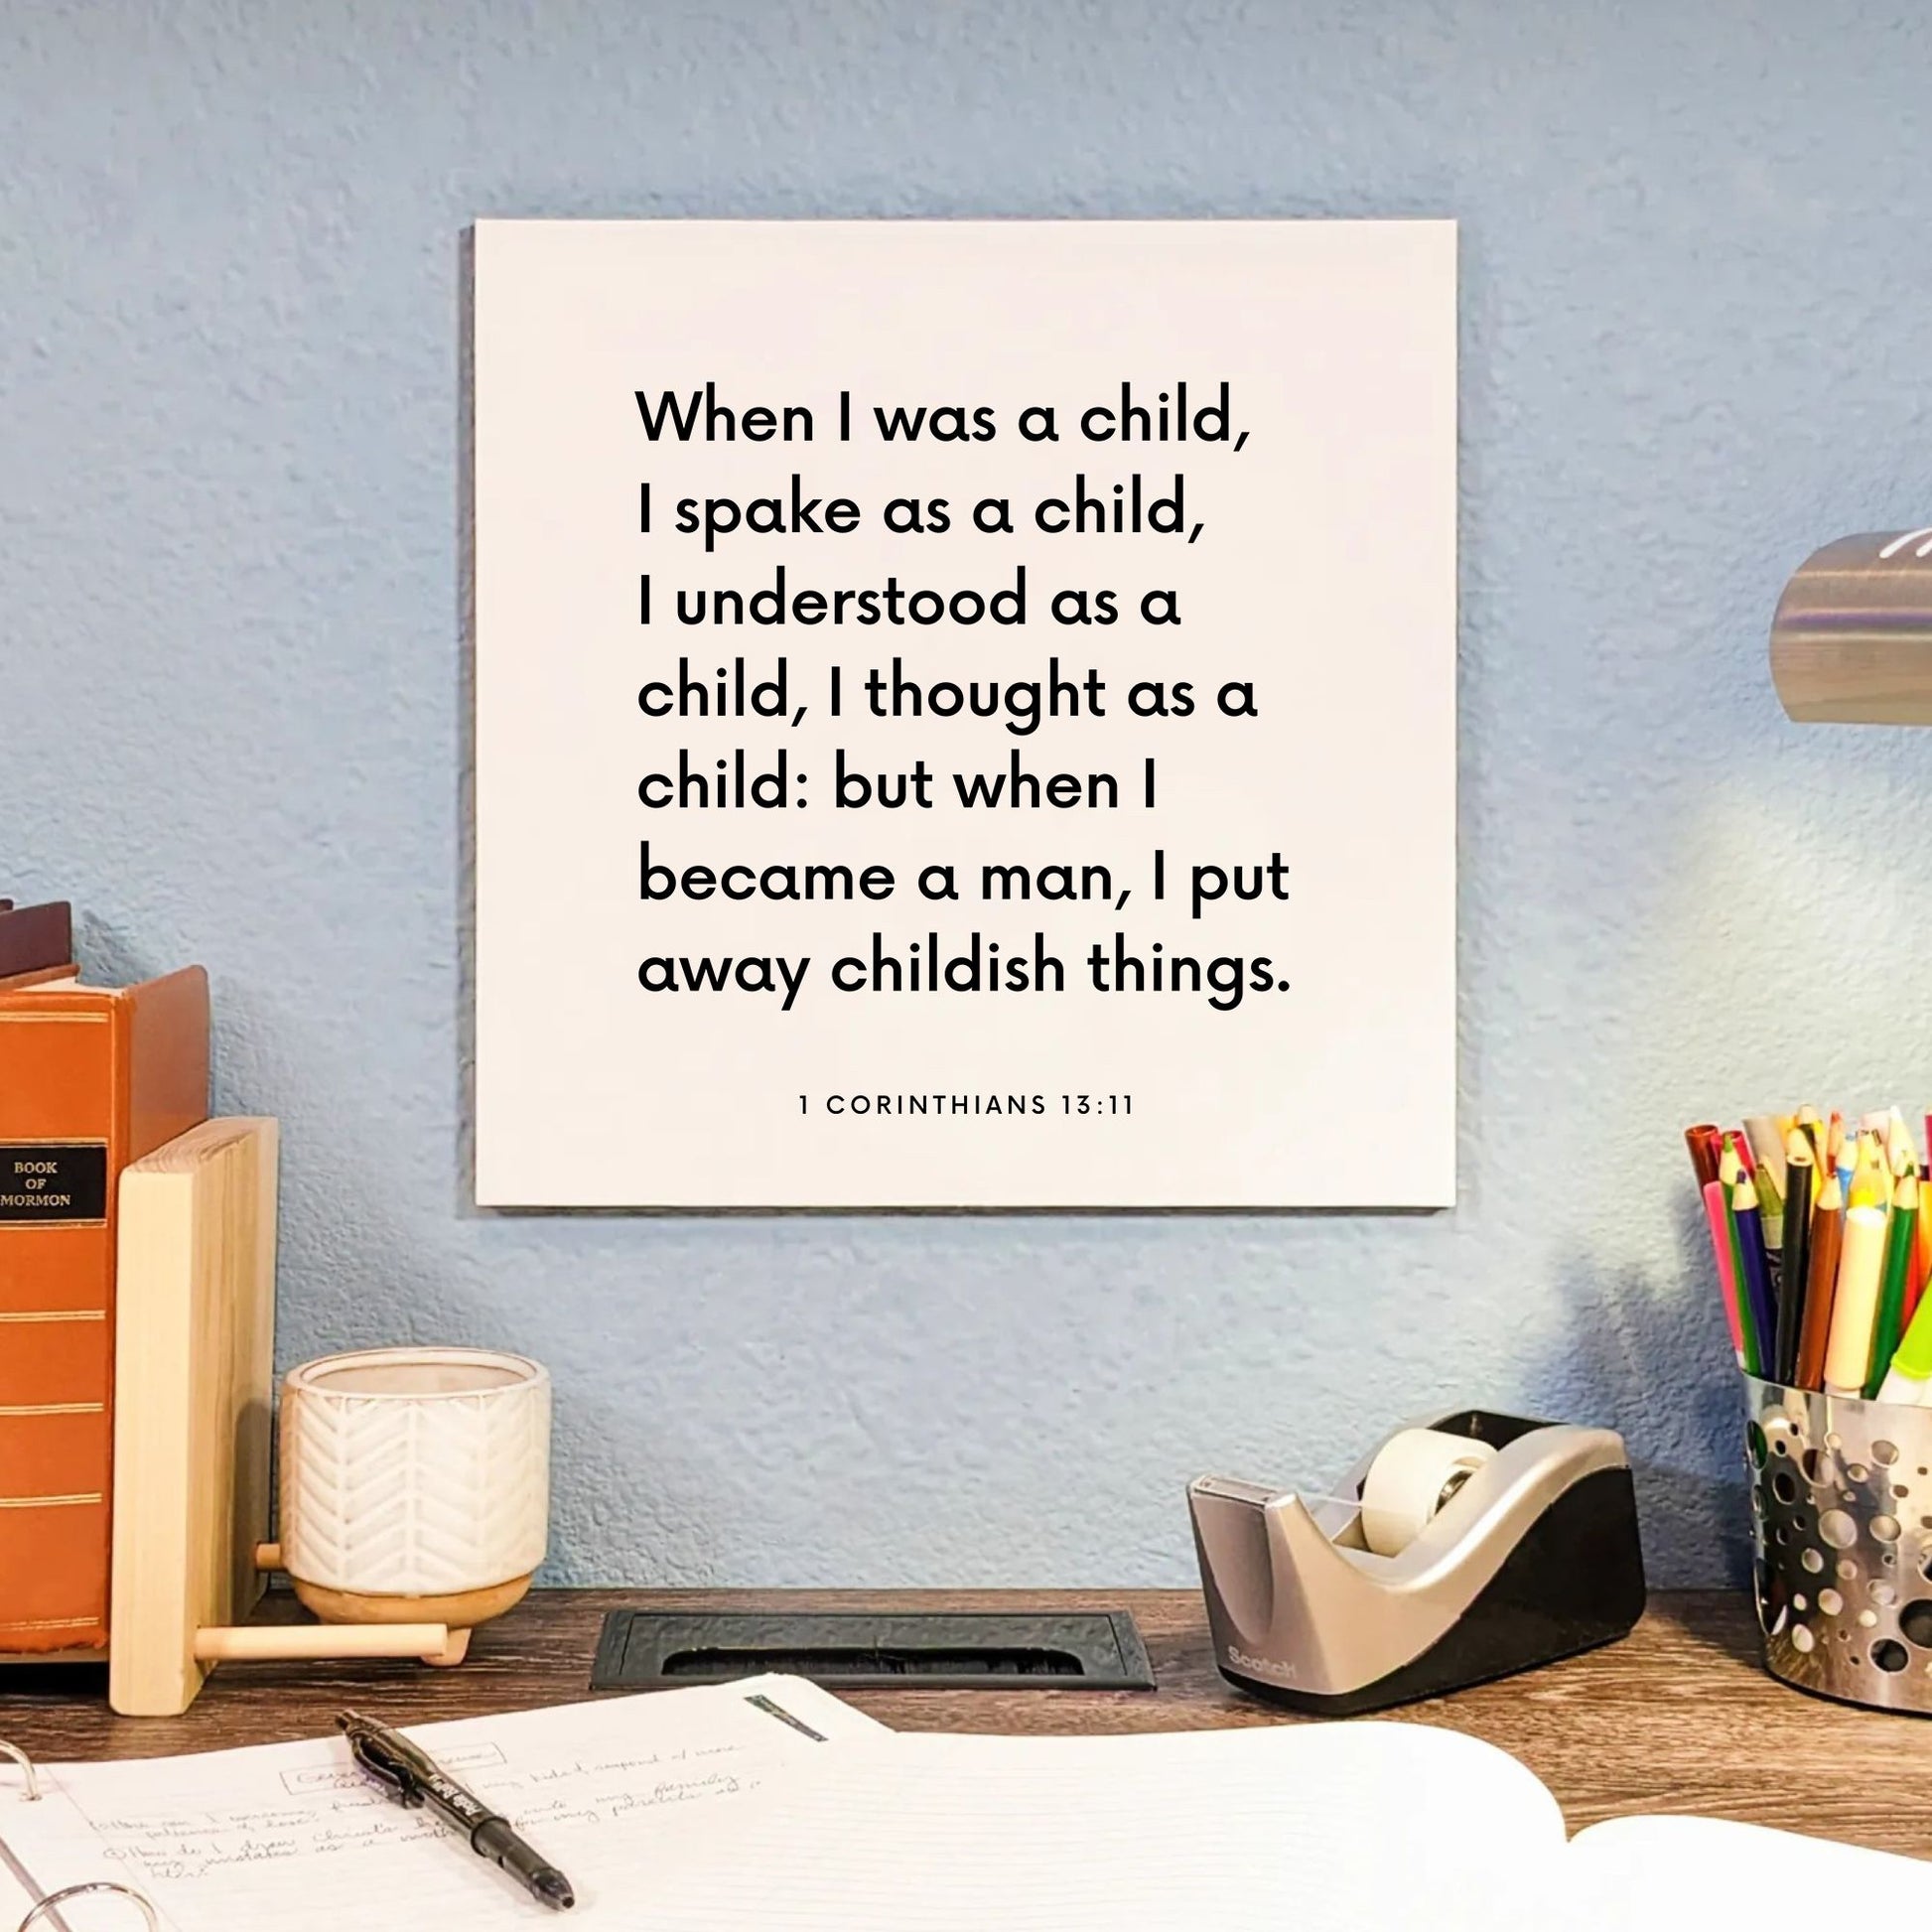 Desk mouting of the scripture tile for 1 Corinthians 13:11 - "When I was a child, I spake as a child"